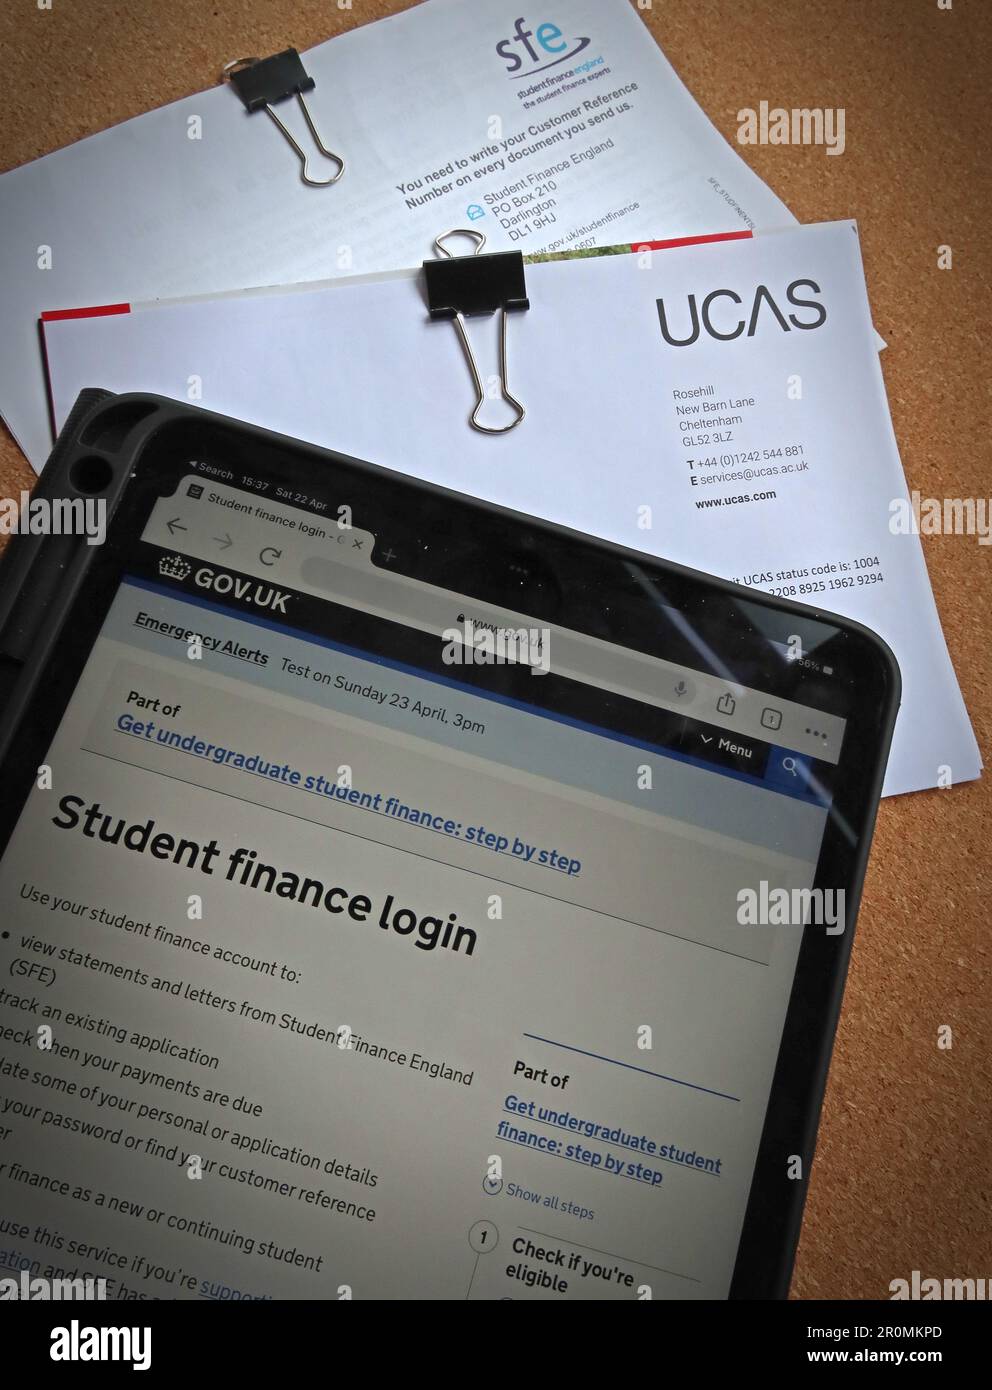 UCAS and SFE website Student Finance applications, for university and further education places Stock Photo